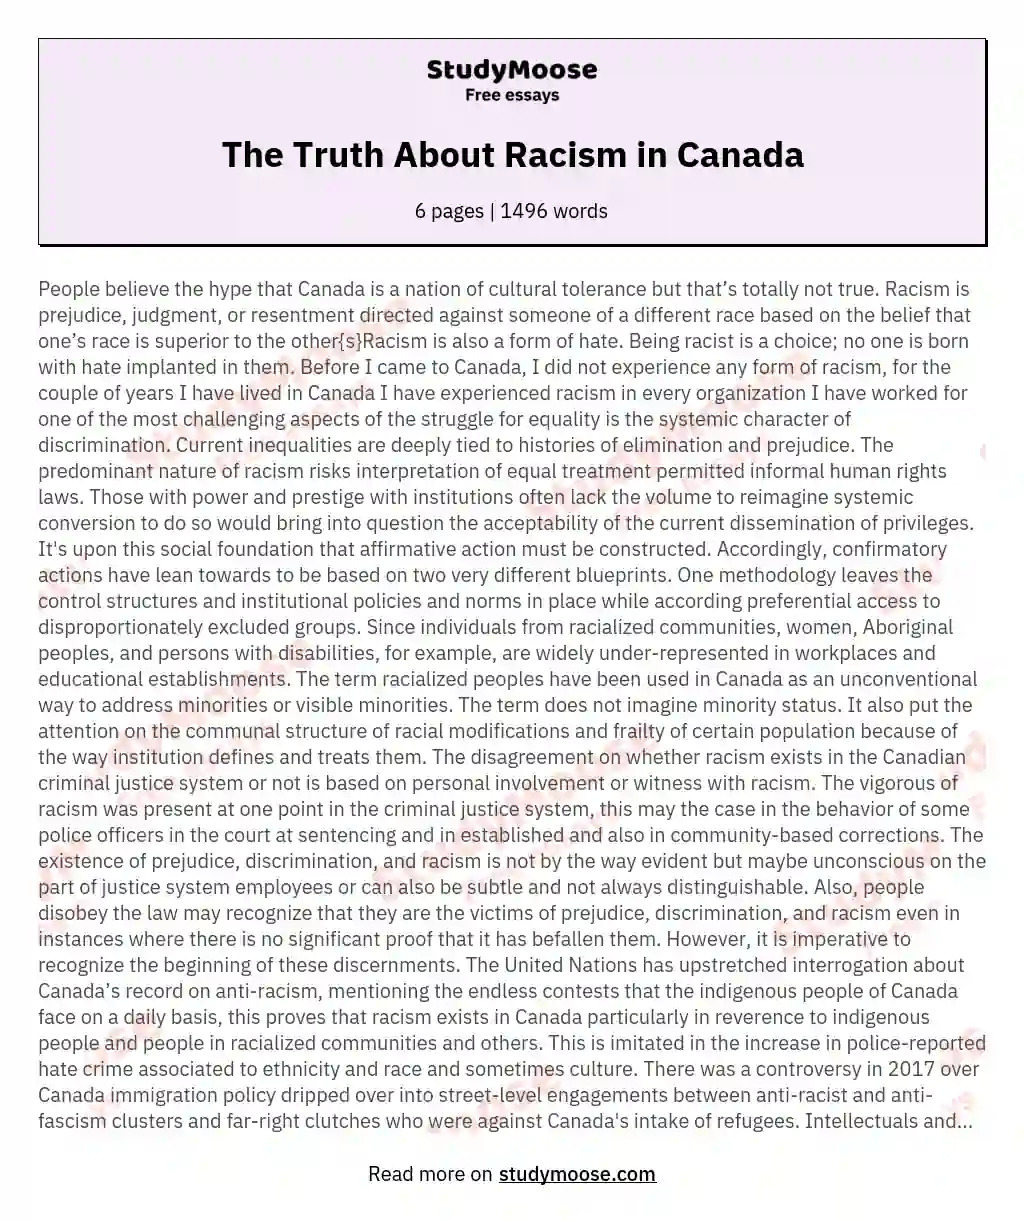 The Truth About Racism in Canada